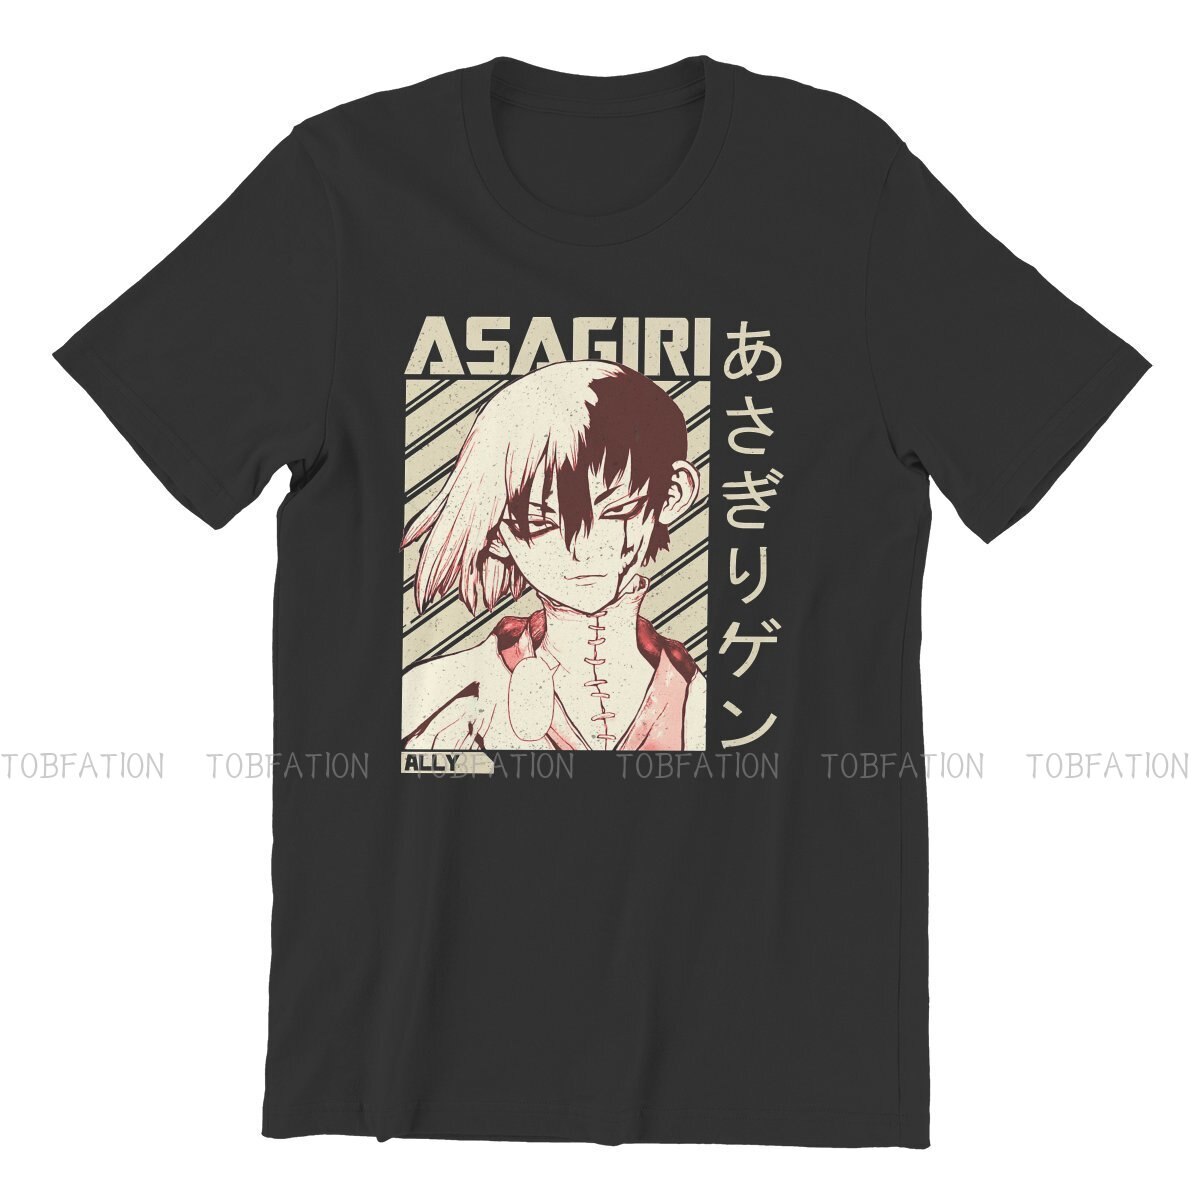 Gen Style TShirt Dr Stone Chemistry Anime Top Quality New Design Gift Clothes T Shirt Stuff 3 - Dr. Stone Merch